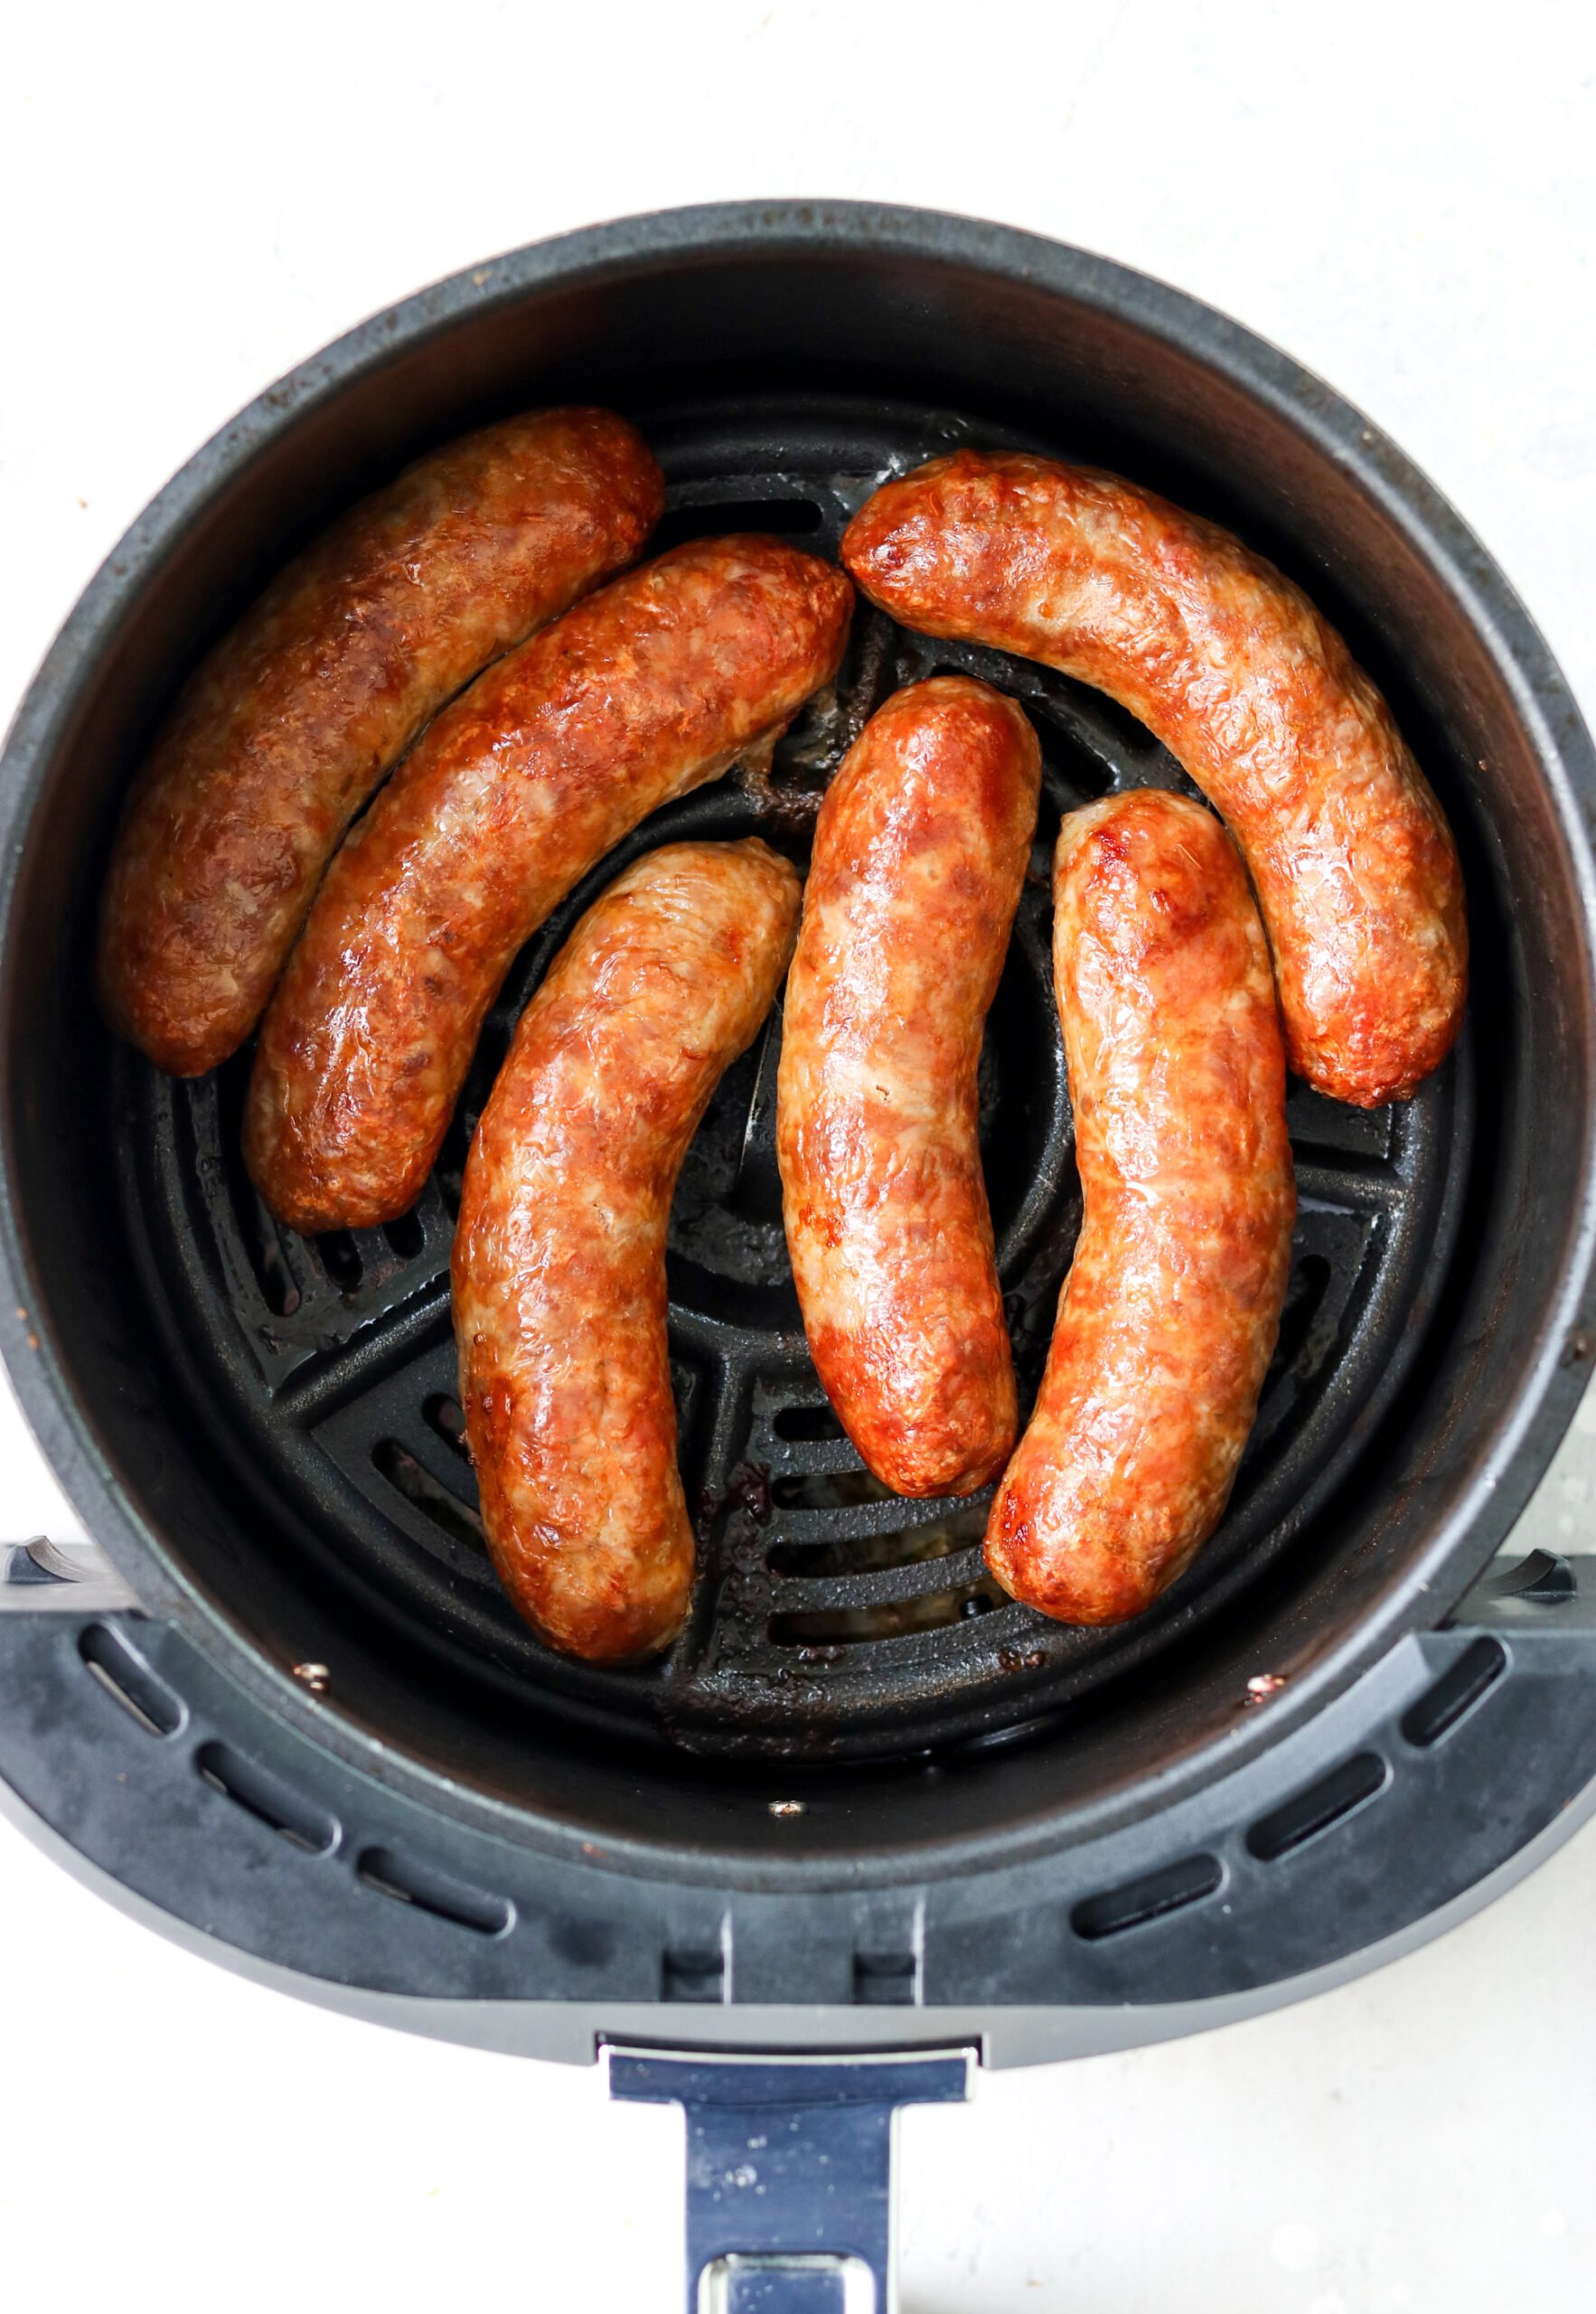 cooked Italian sausages in an air fryer basket